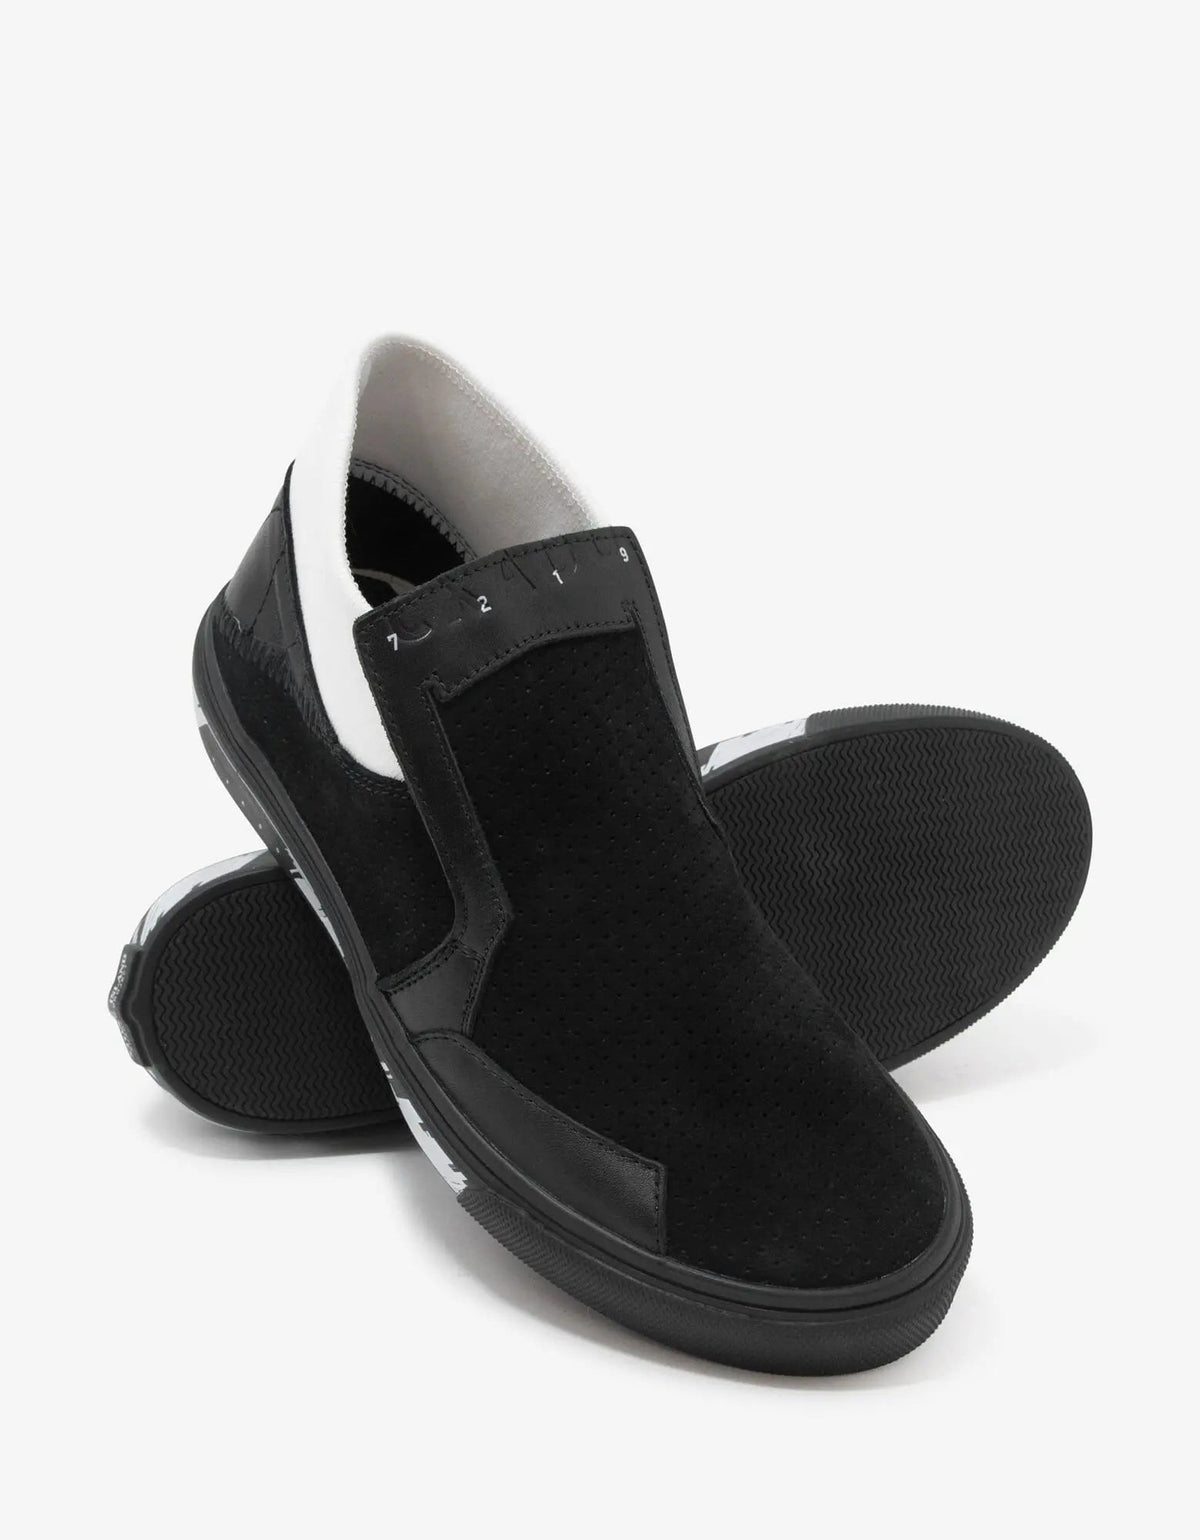 Stone Island Shadow Project Stone Island Shadow Project Black Leather Slip-On Trainers